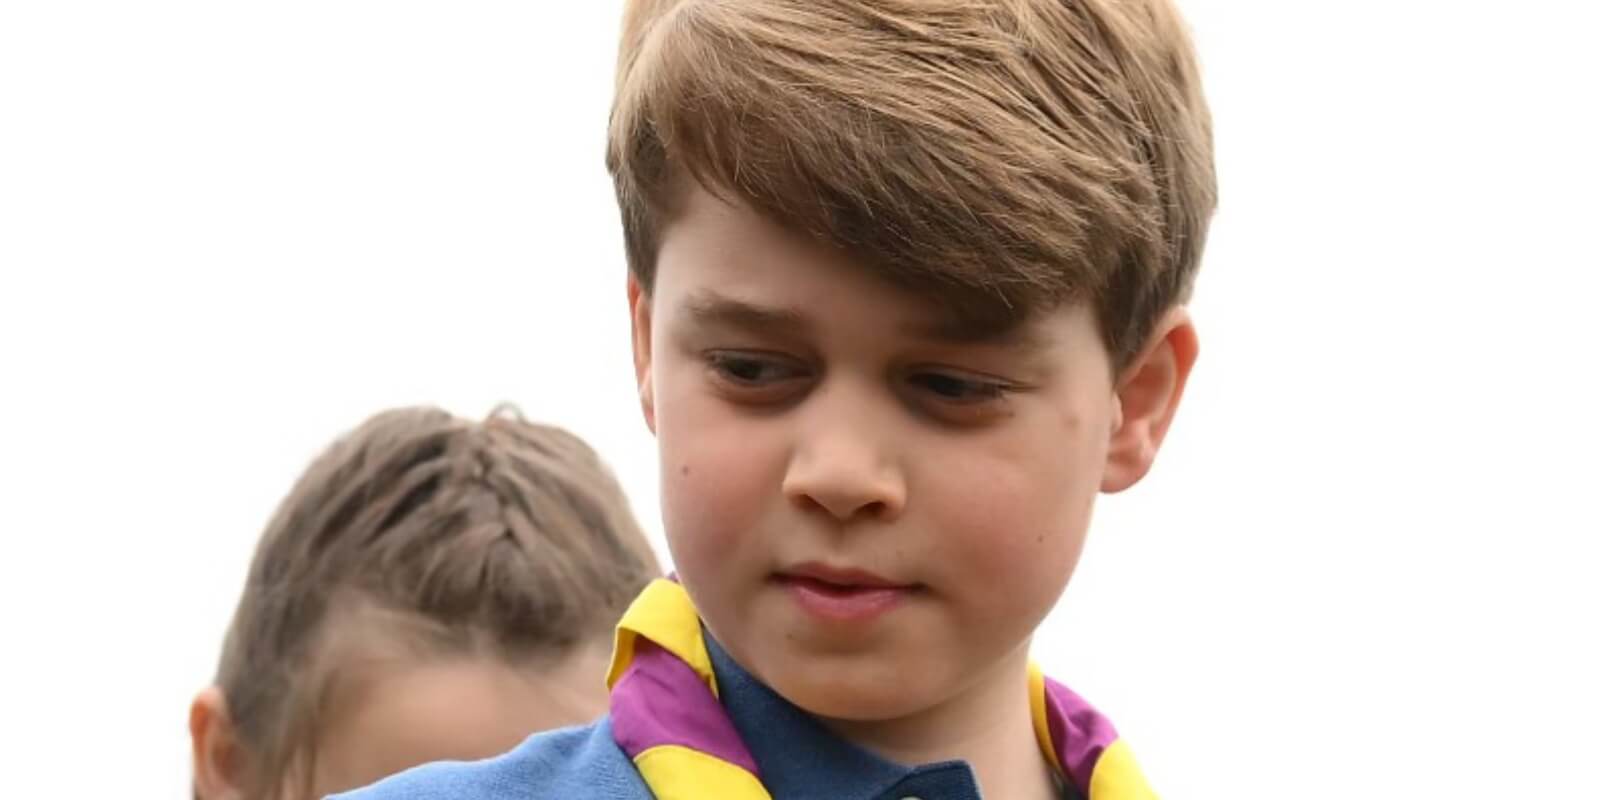 Prince George will eventually become king, but will he have a large support group to help him?